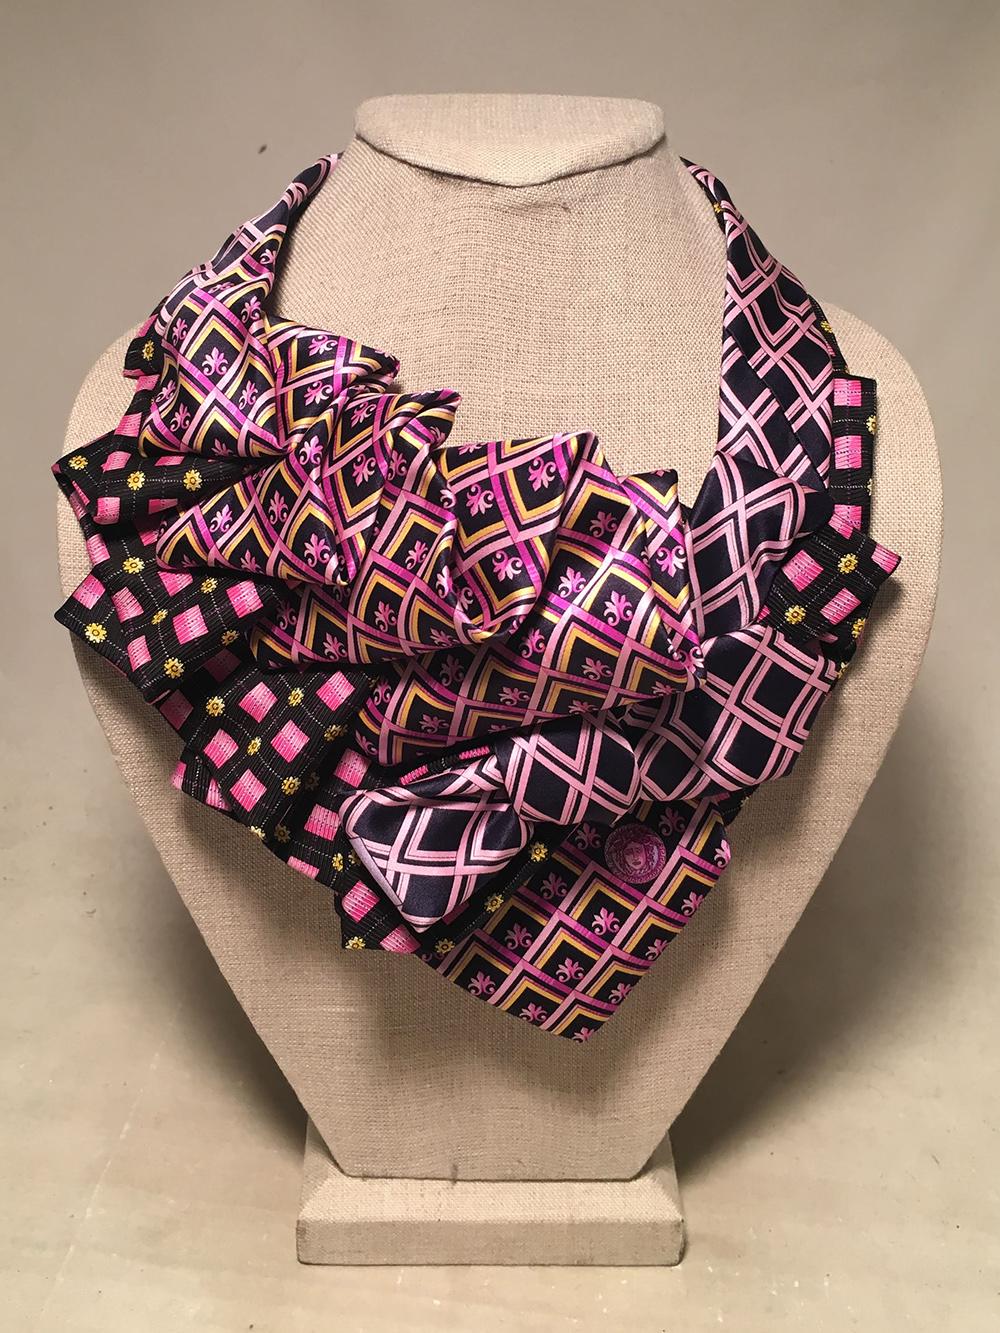 Vintage Versace Silk Ties artistically arranged into a gorgeous ascot necklace. Versace Pink and black square print silk tie with yellow details, Pink yellow and black box print tie, and pink and navy cross hatch print tie all combined and ruched